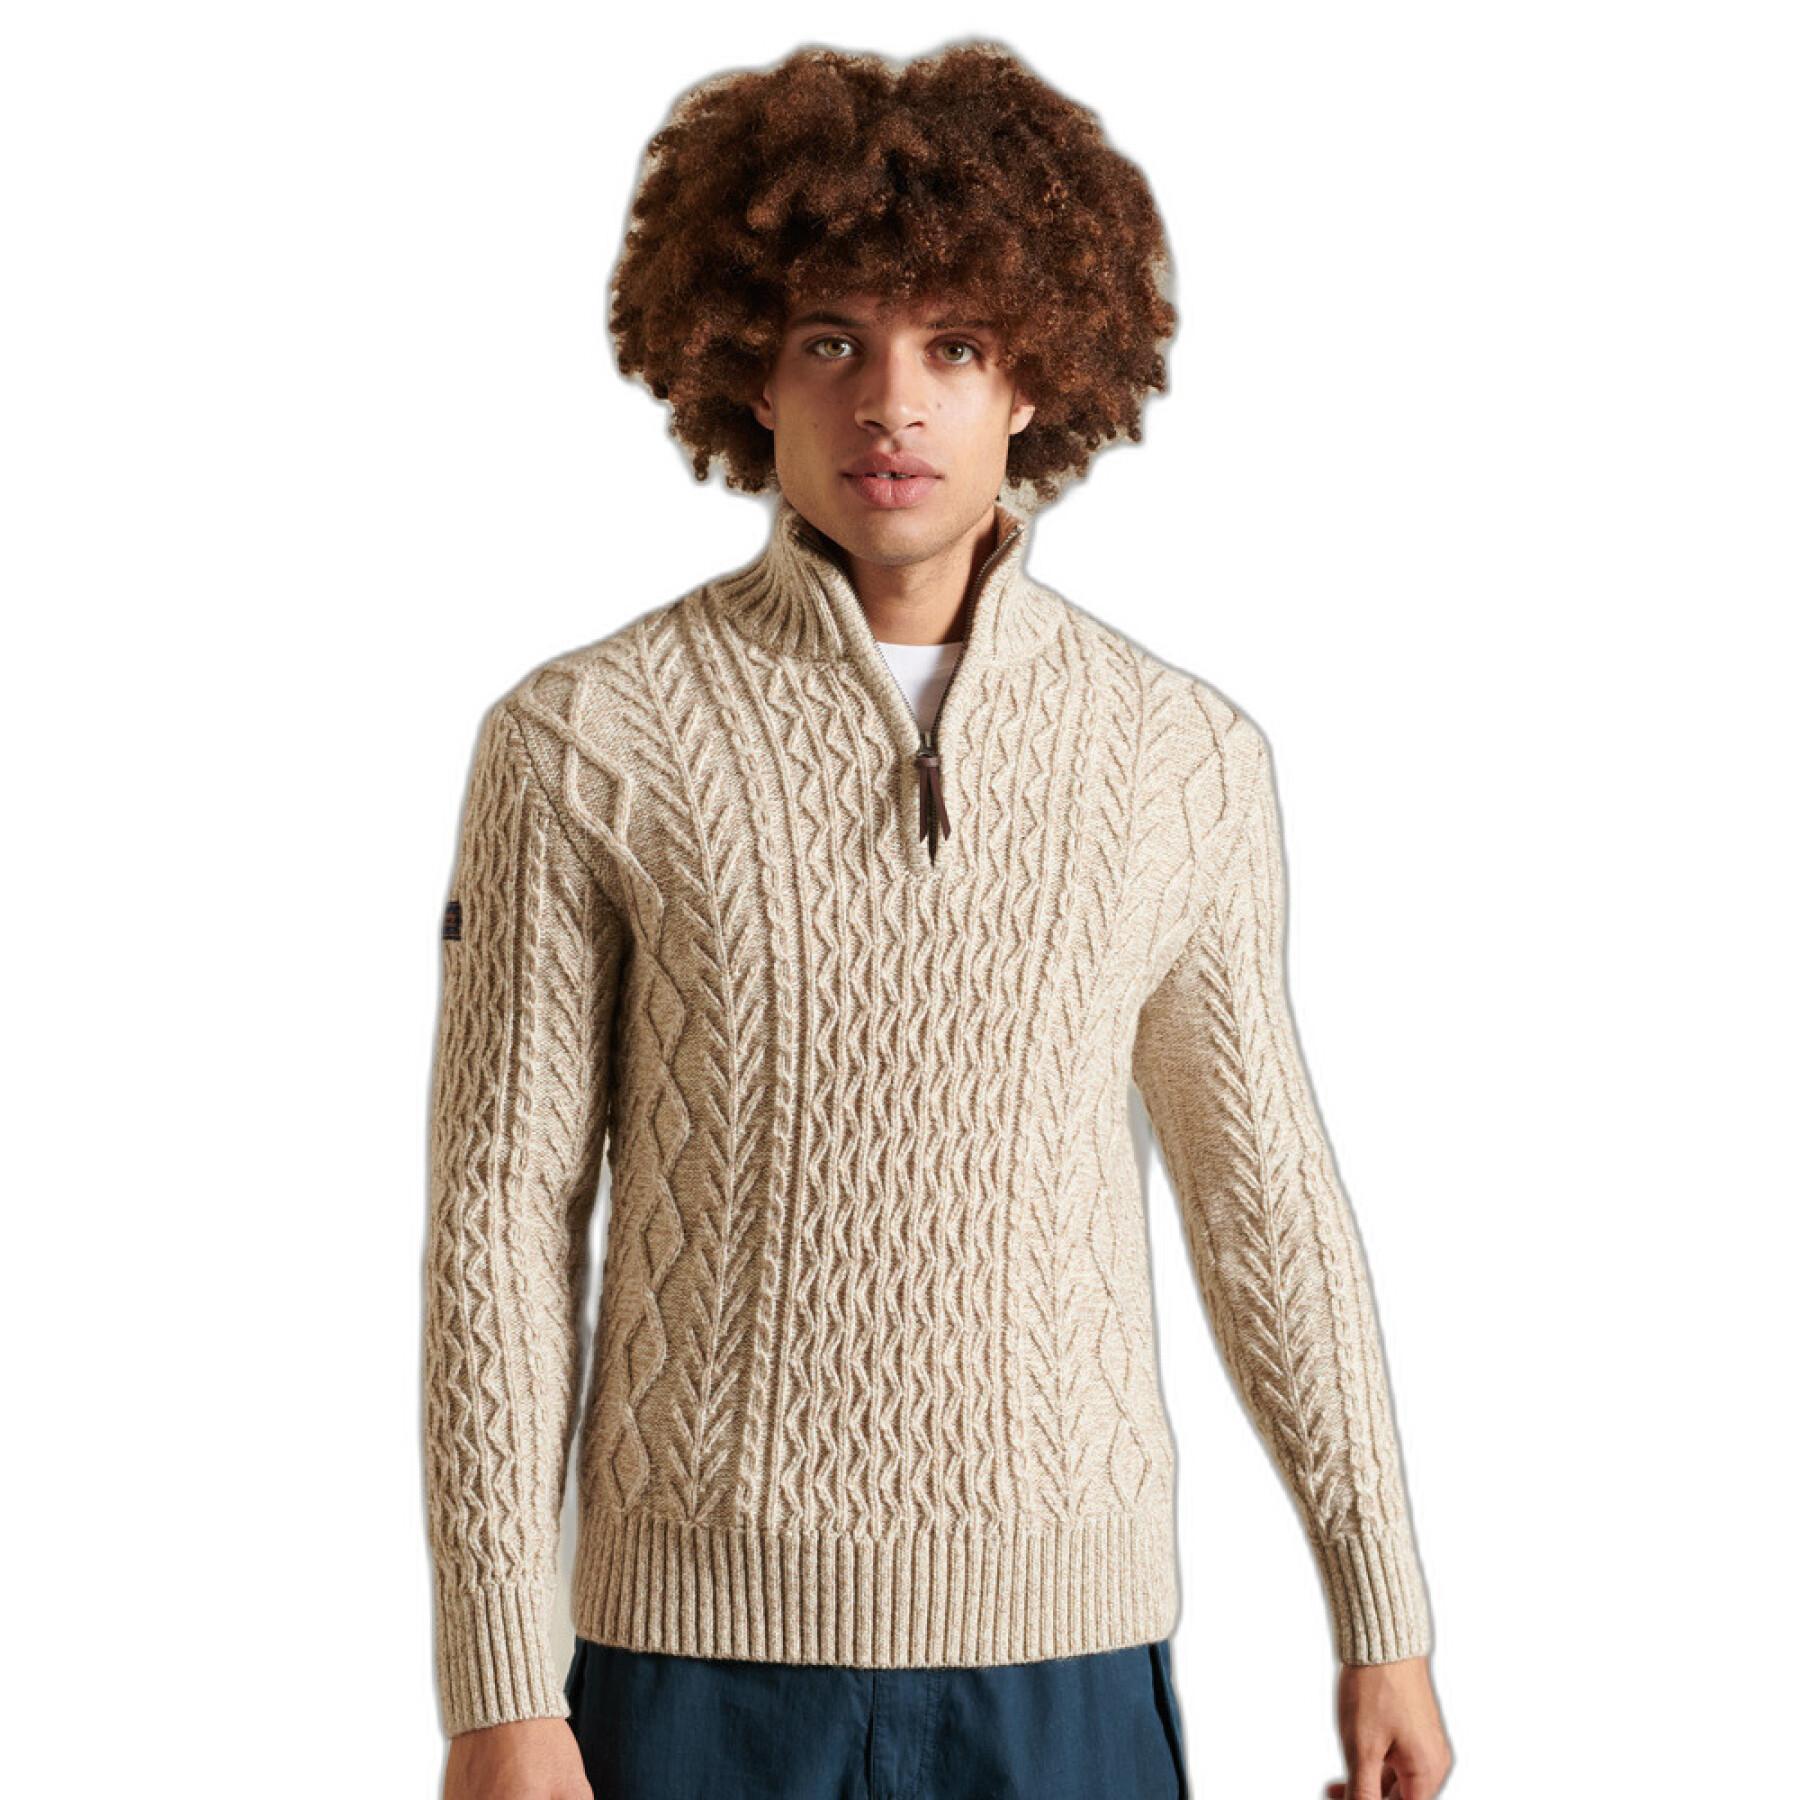 Pulower Superdry Henley Jacob